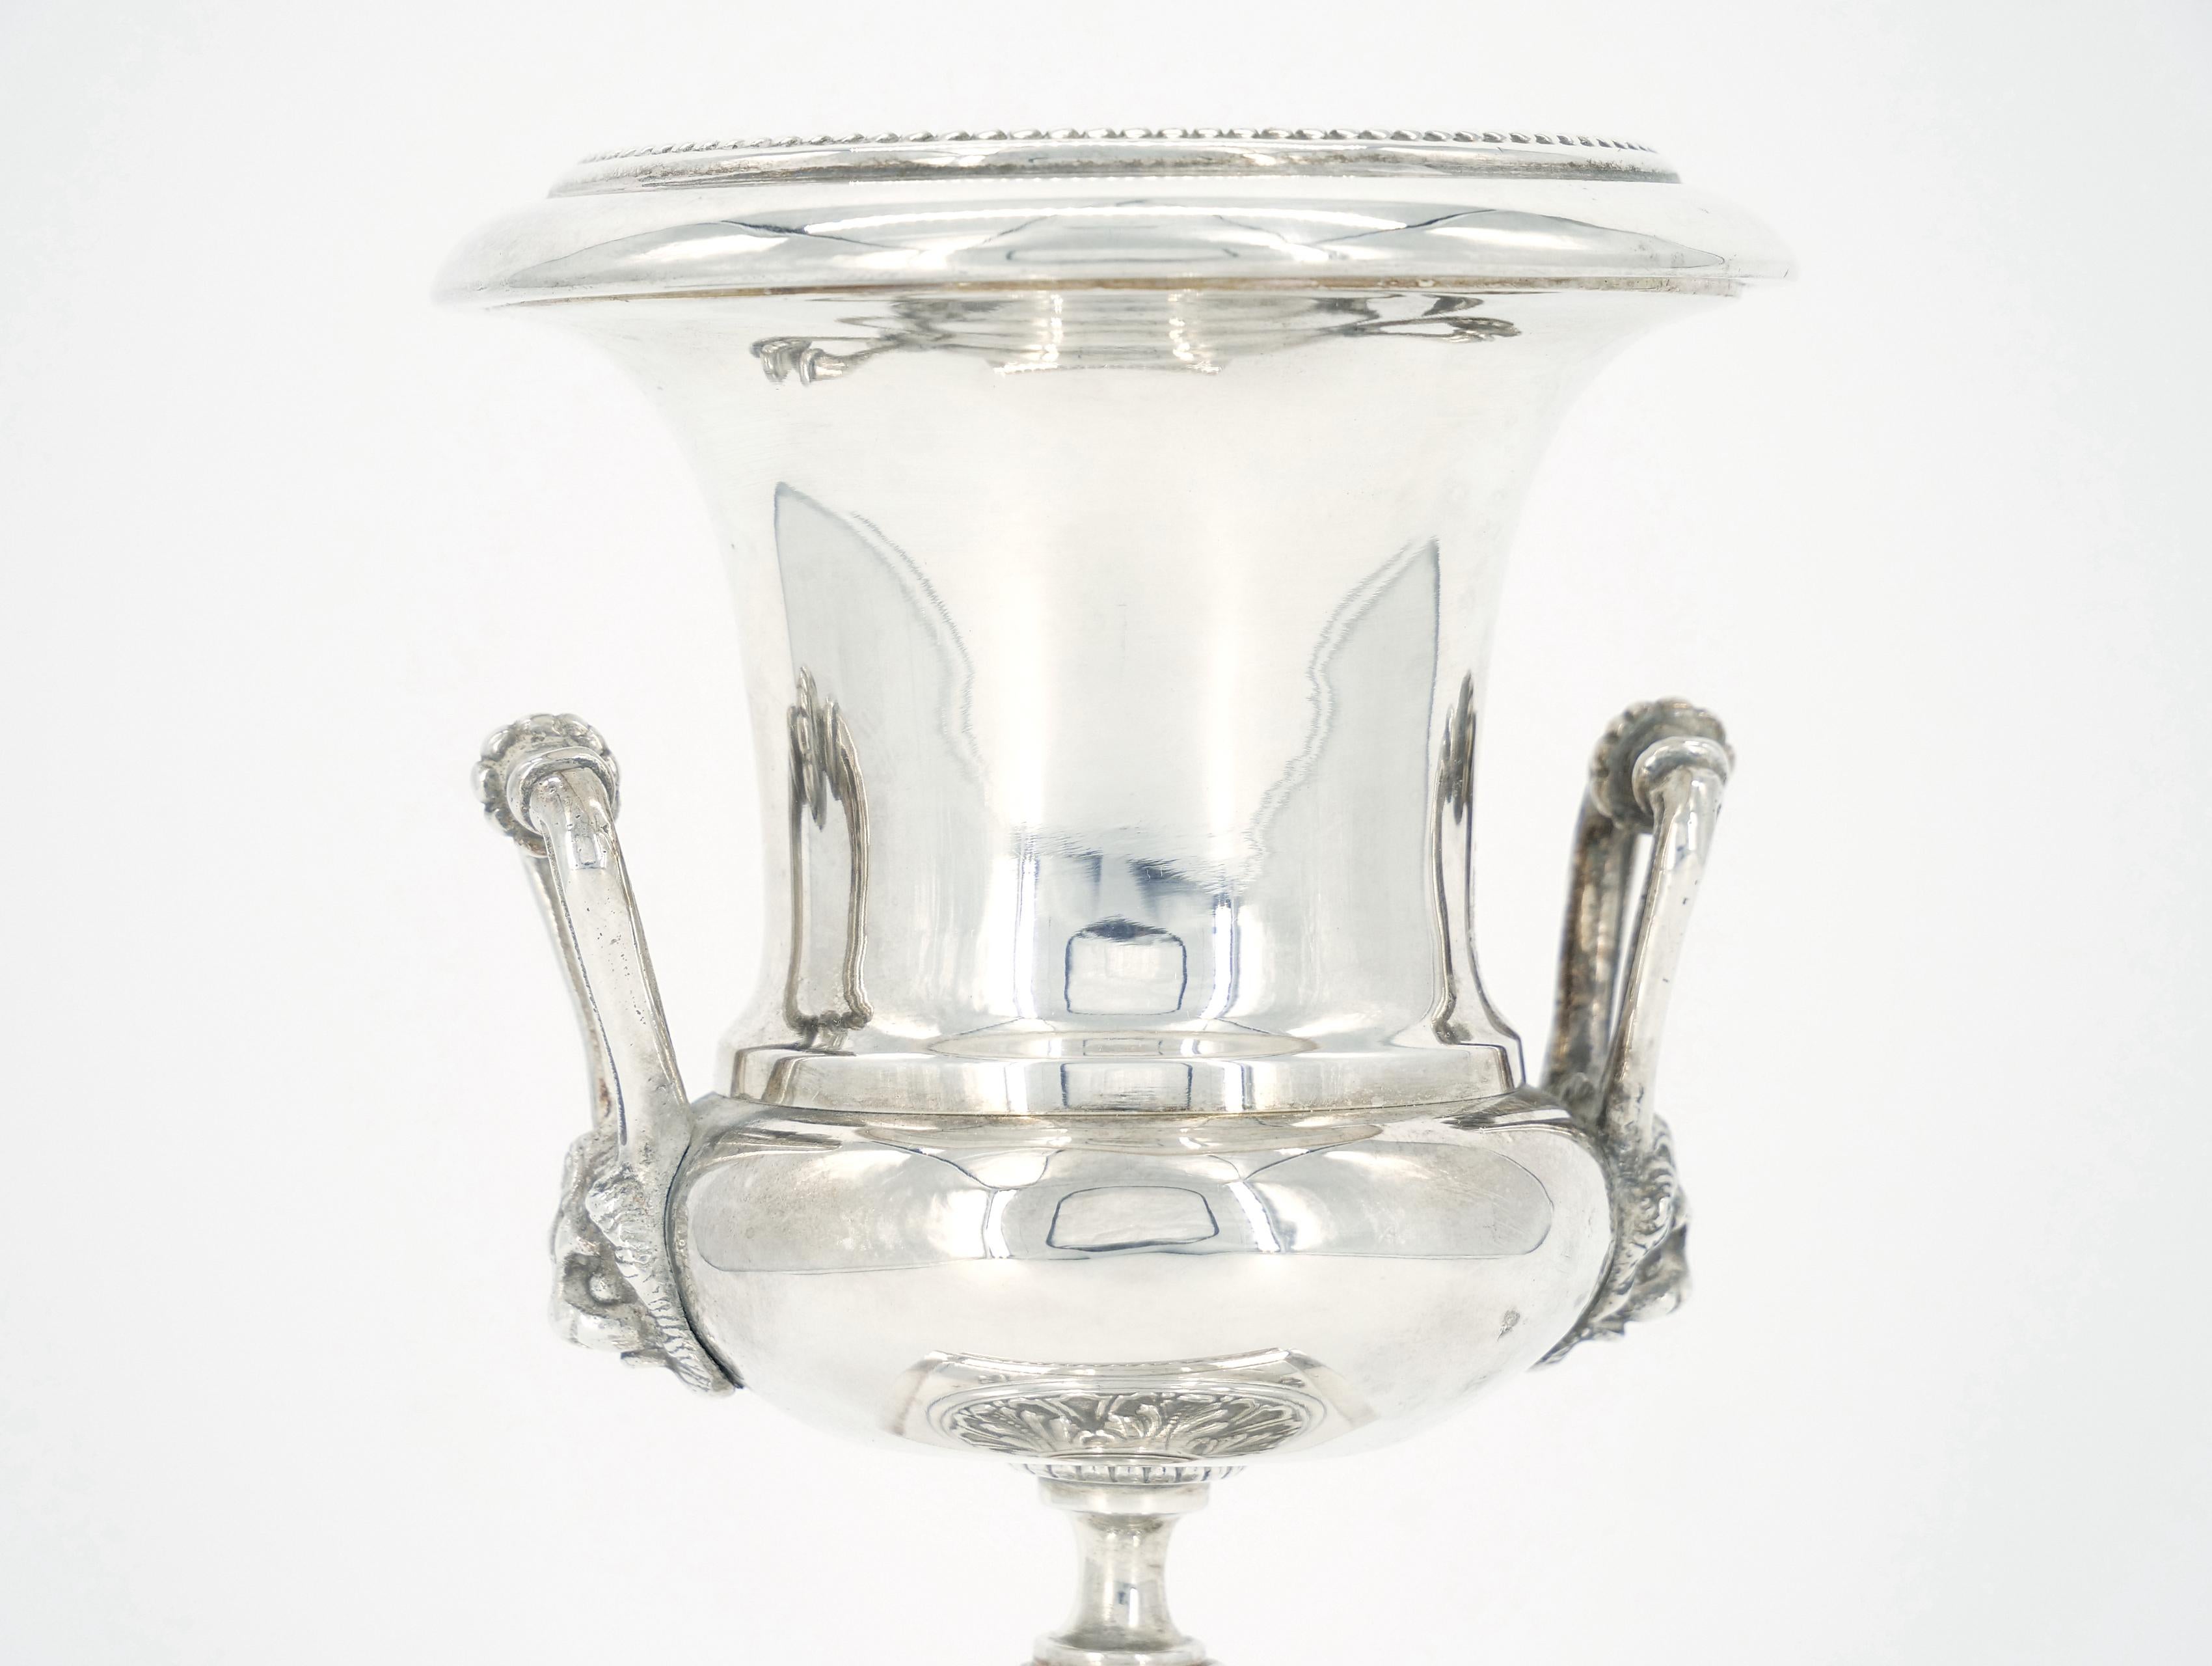 Discover the exquisite charm of our Old English Sheffield silver plated small decorative urn / vase with lion head side handle. This timeless piece , adorned with intricate detailing and a boasting footed square base , is a perfect fusion of